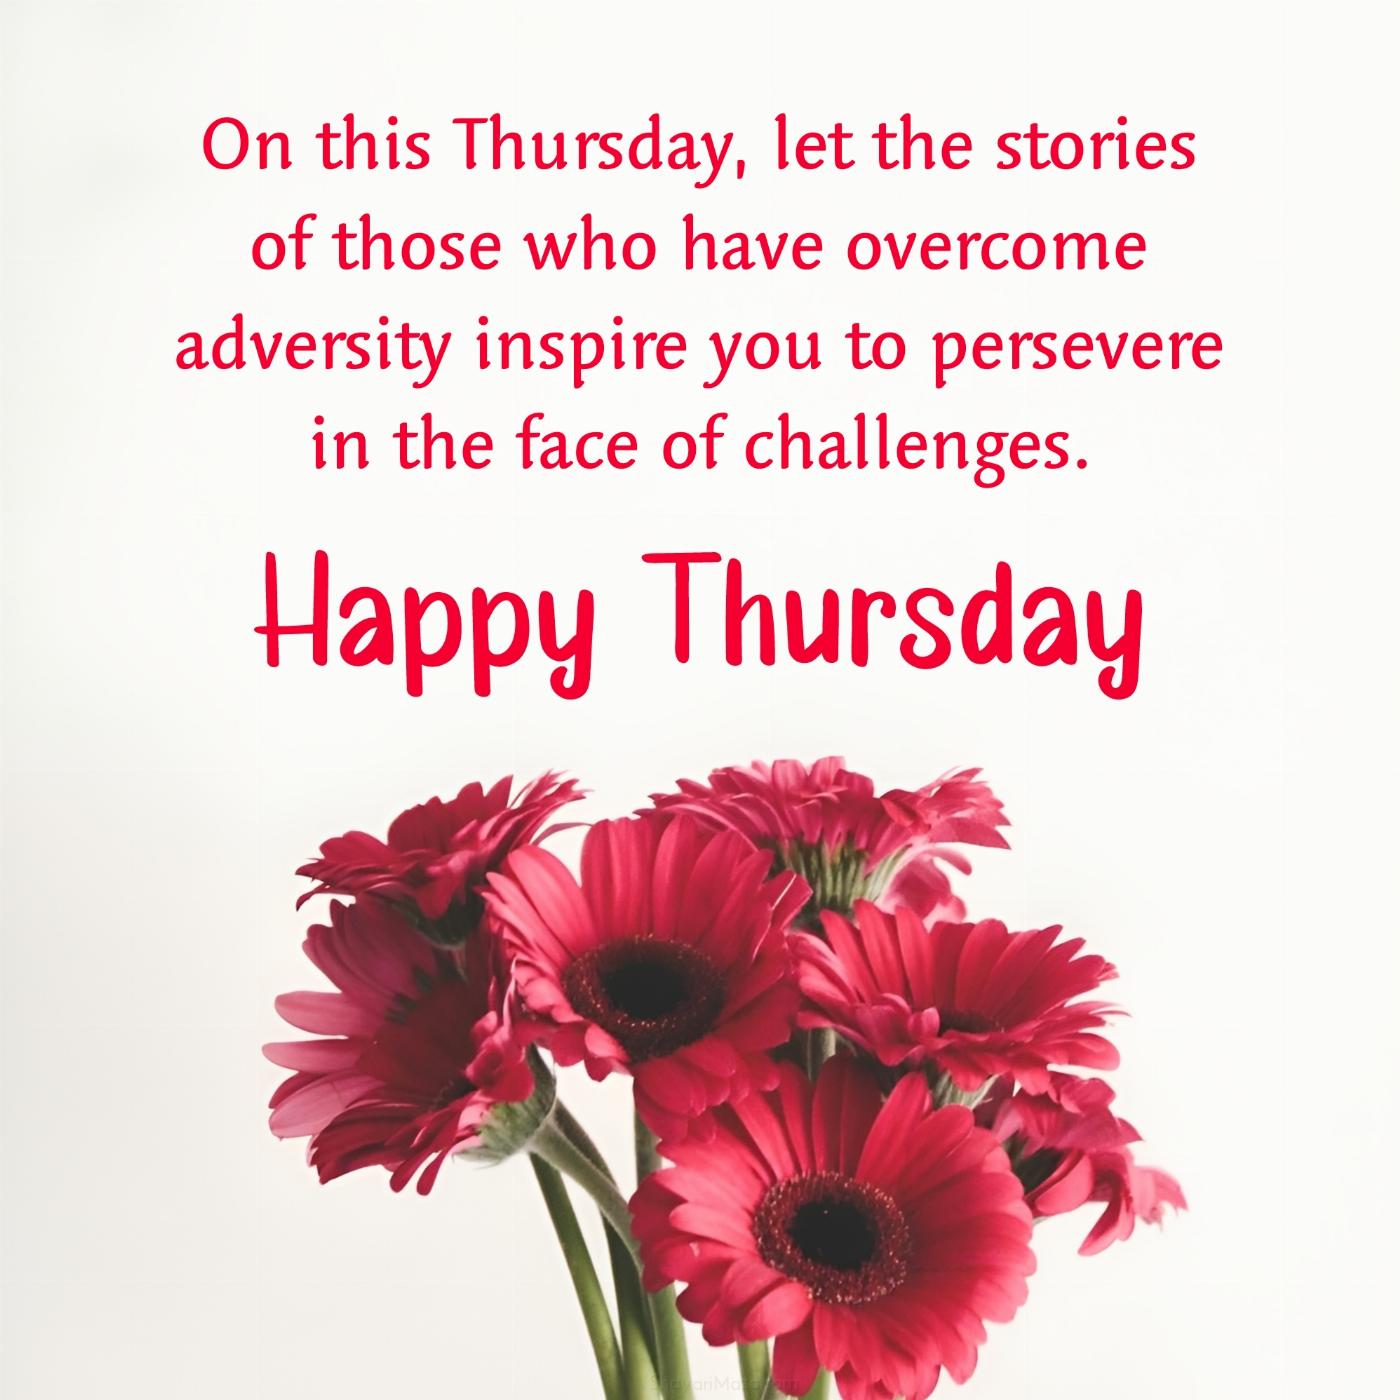 On this Thursday let the stories of those who have overcome adversity